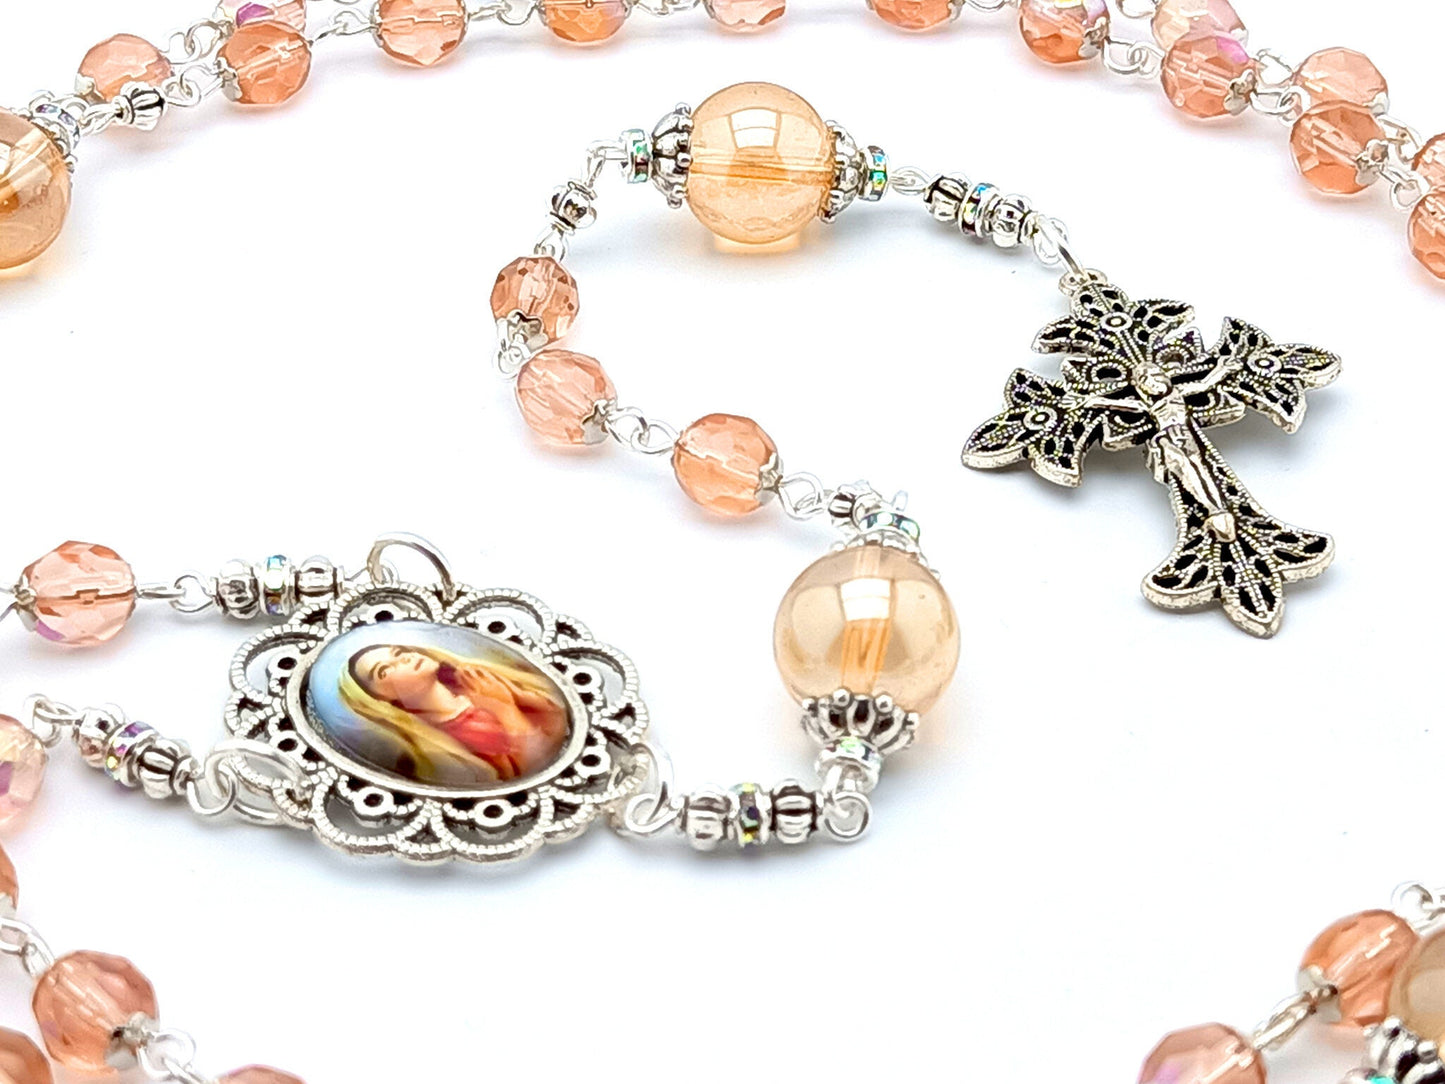 Virgin Mary unique rosary beads with rose gold faceted glass beads, silver filigree crucifix and picture centre medal.